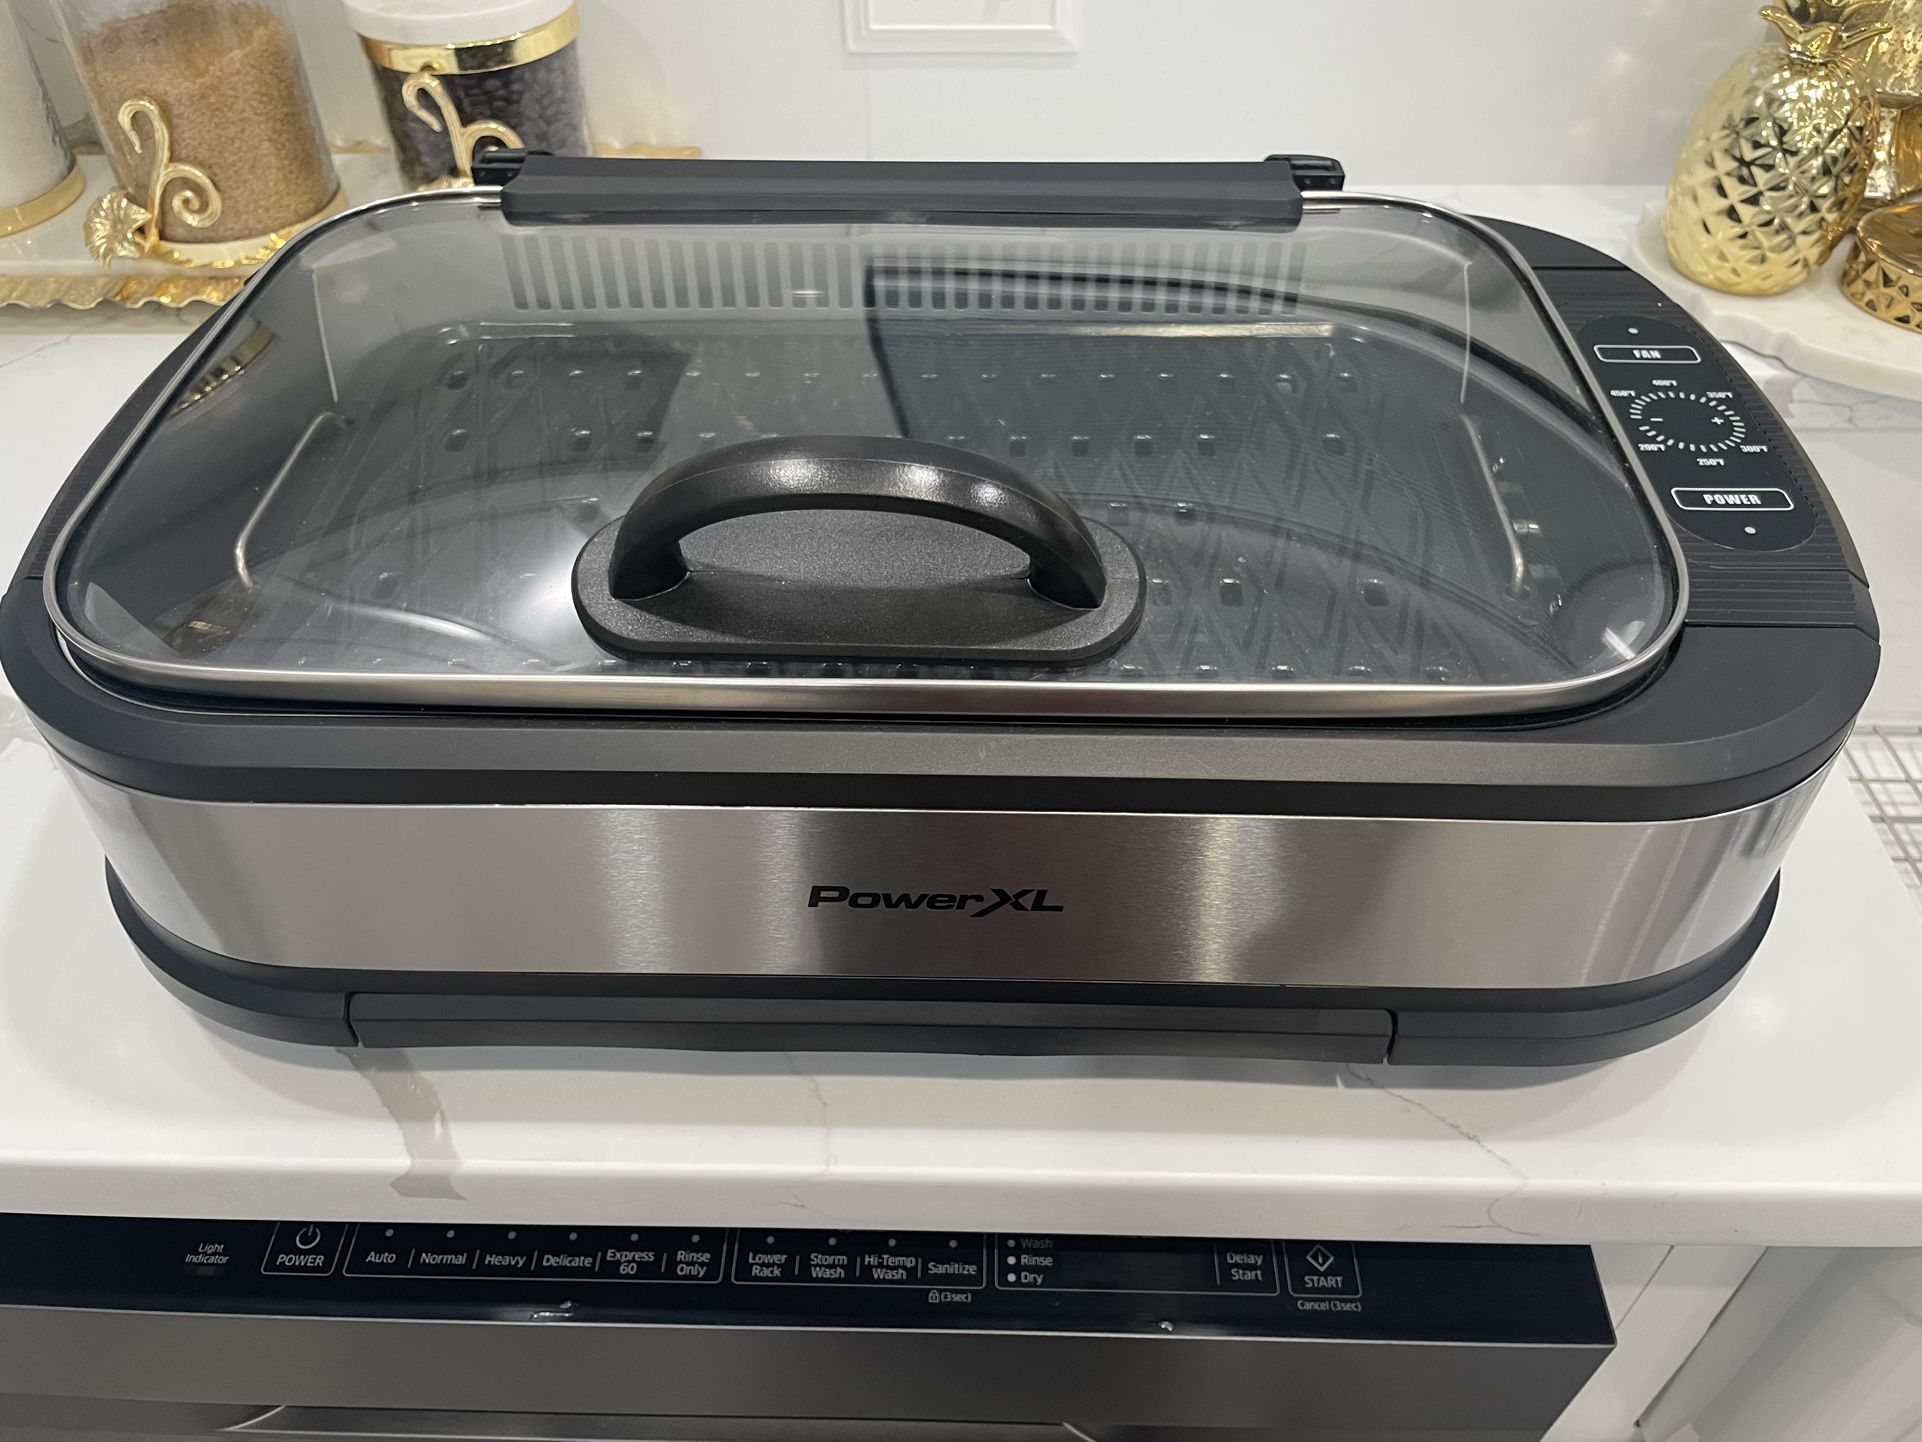 Power XL Smokeless Grill Pro for Sale in Englewd Clfs, NJ - OfferUp